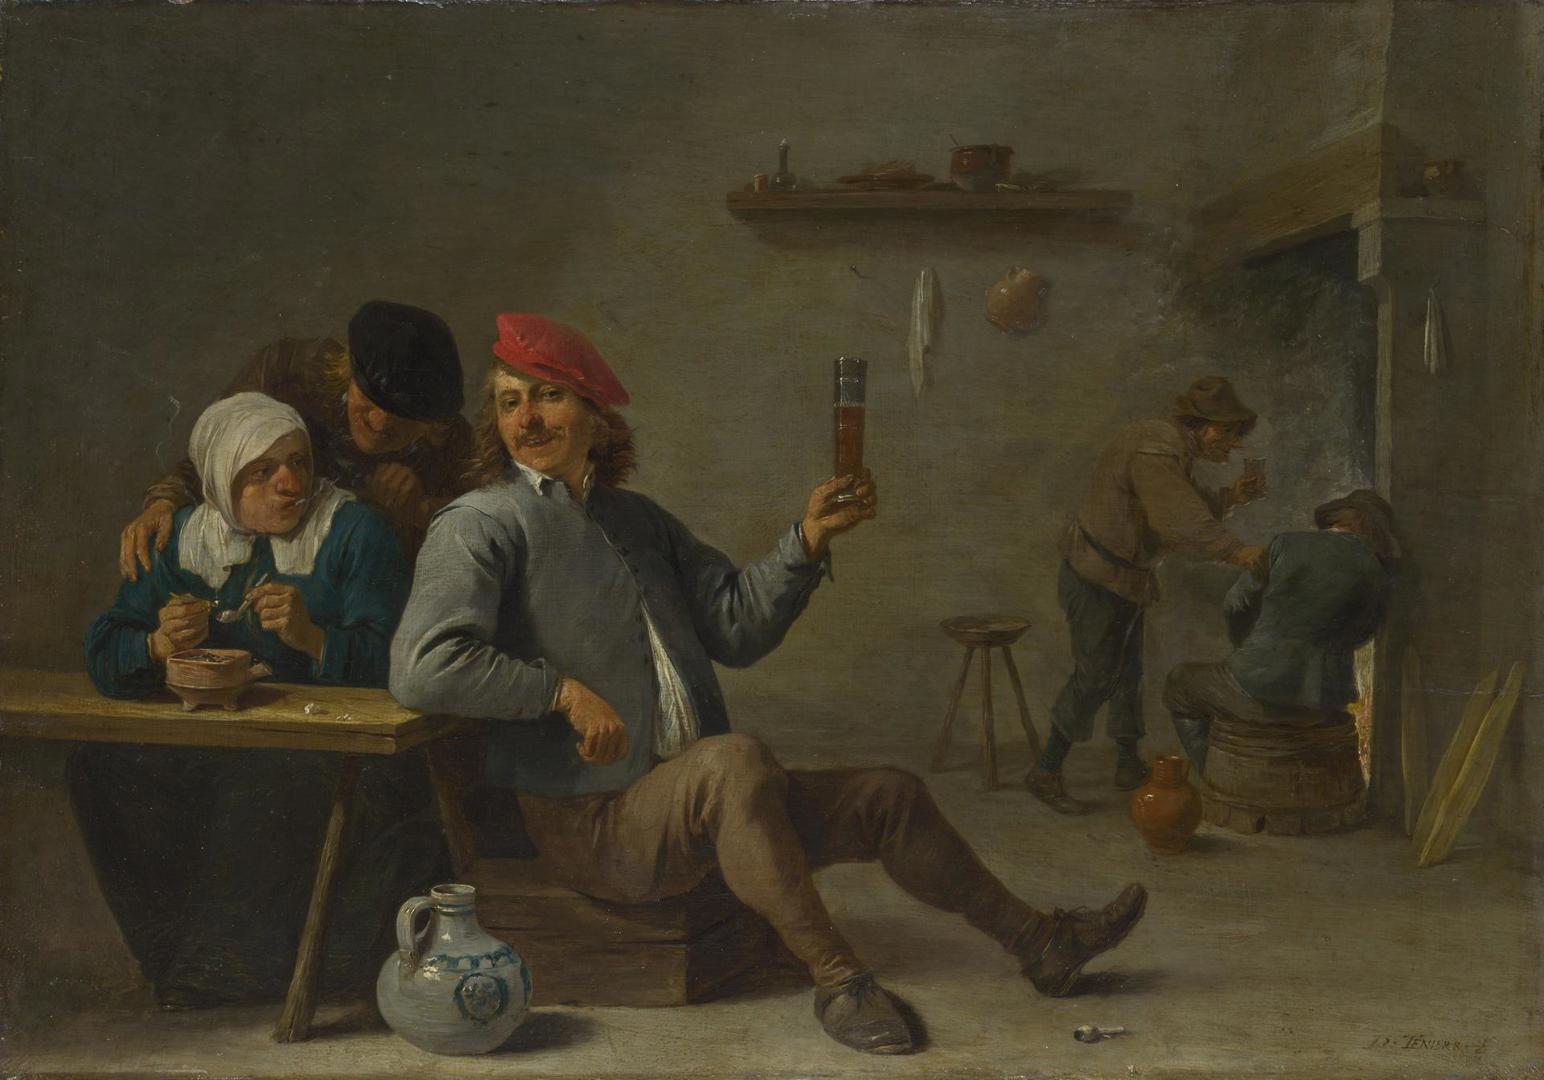 A Man holding a Glass and an Old Woman lighting a Pipe by David Teniers the Younger